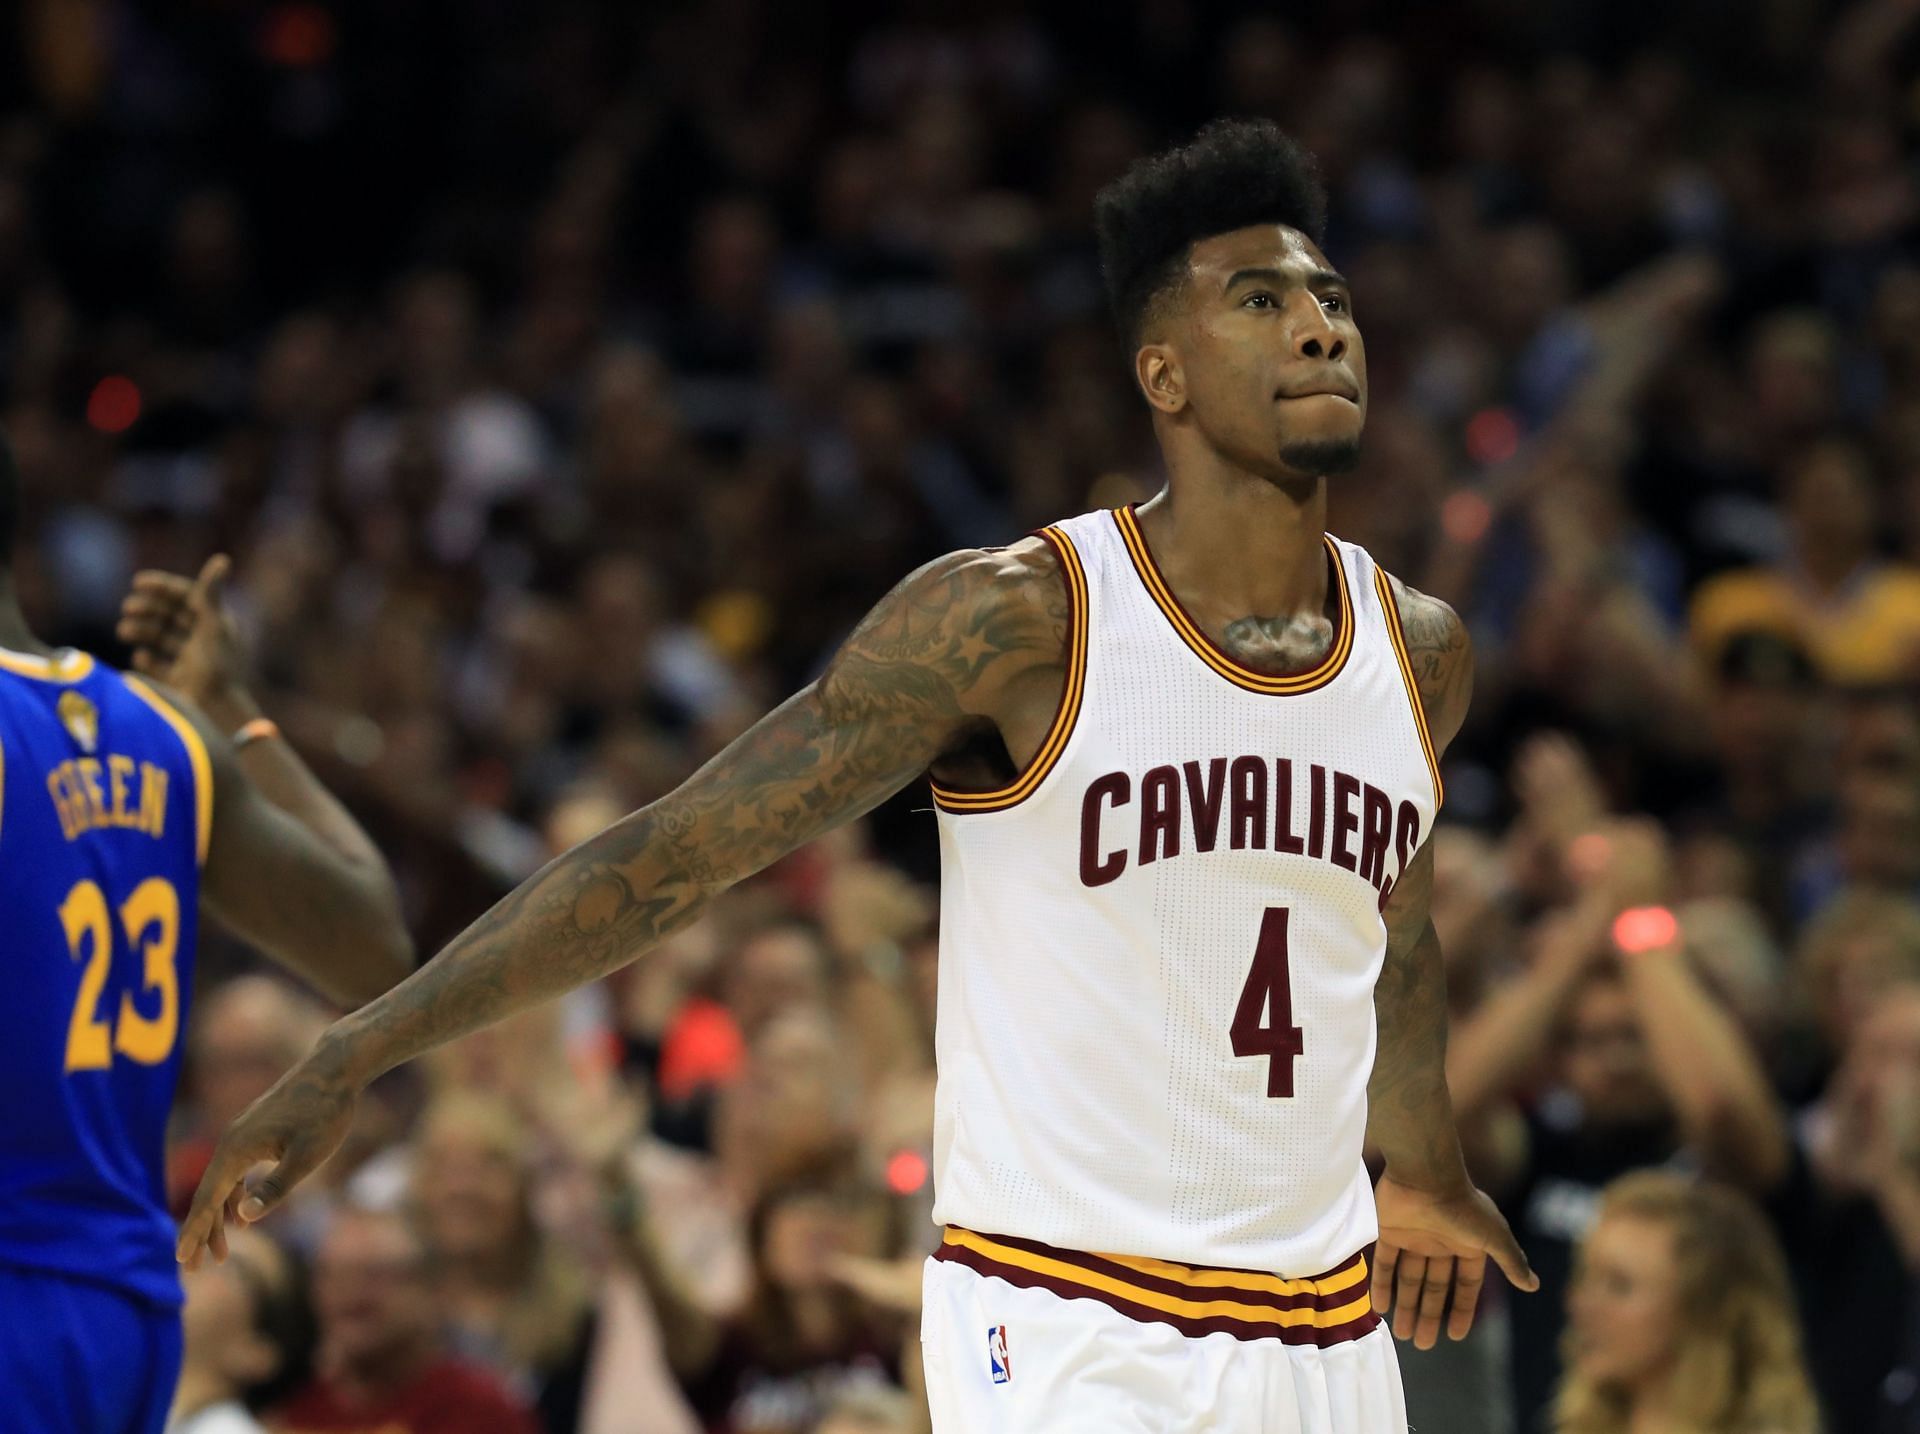 Cleveland Cavaliers guard Iman Shumpert at the 2017 NBA Finals - Game Four